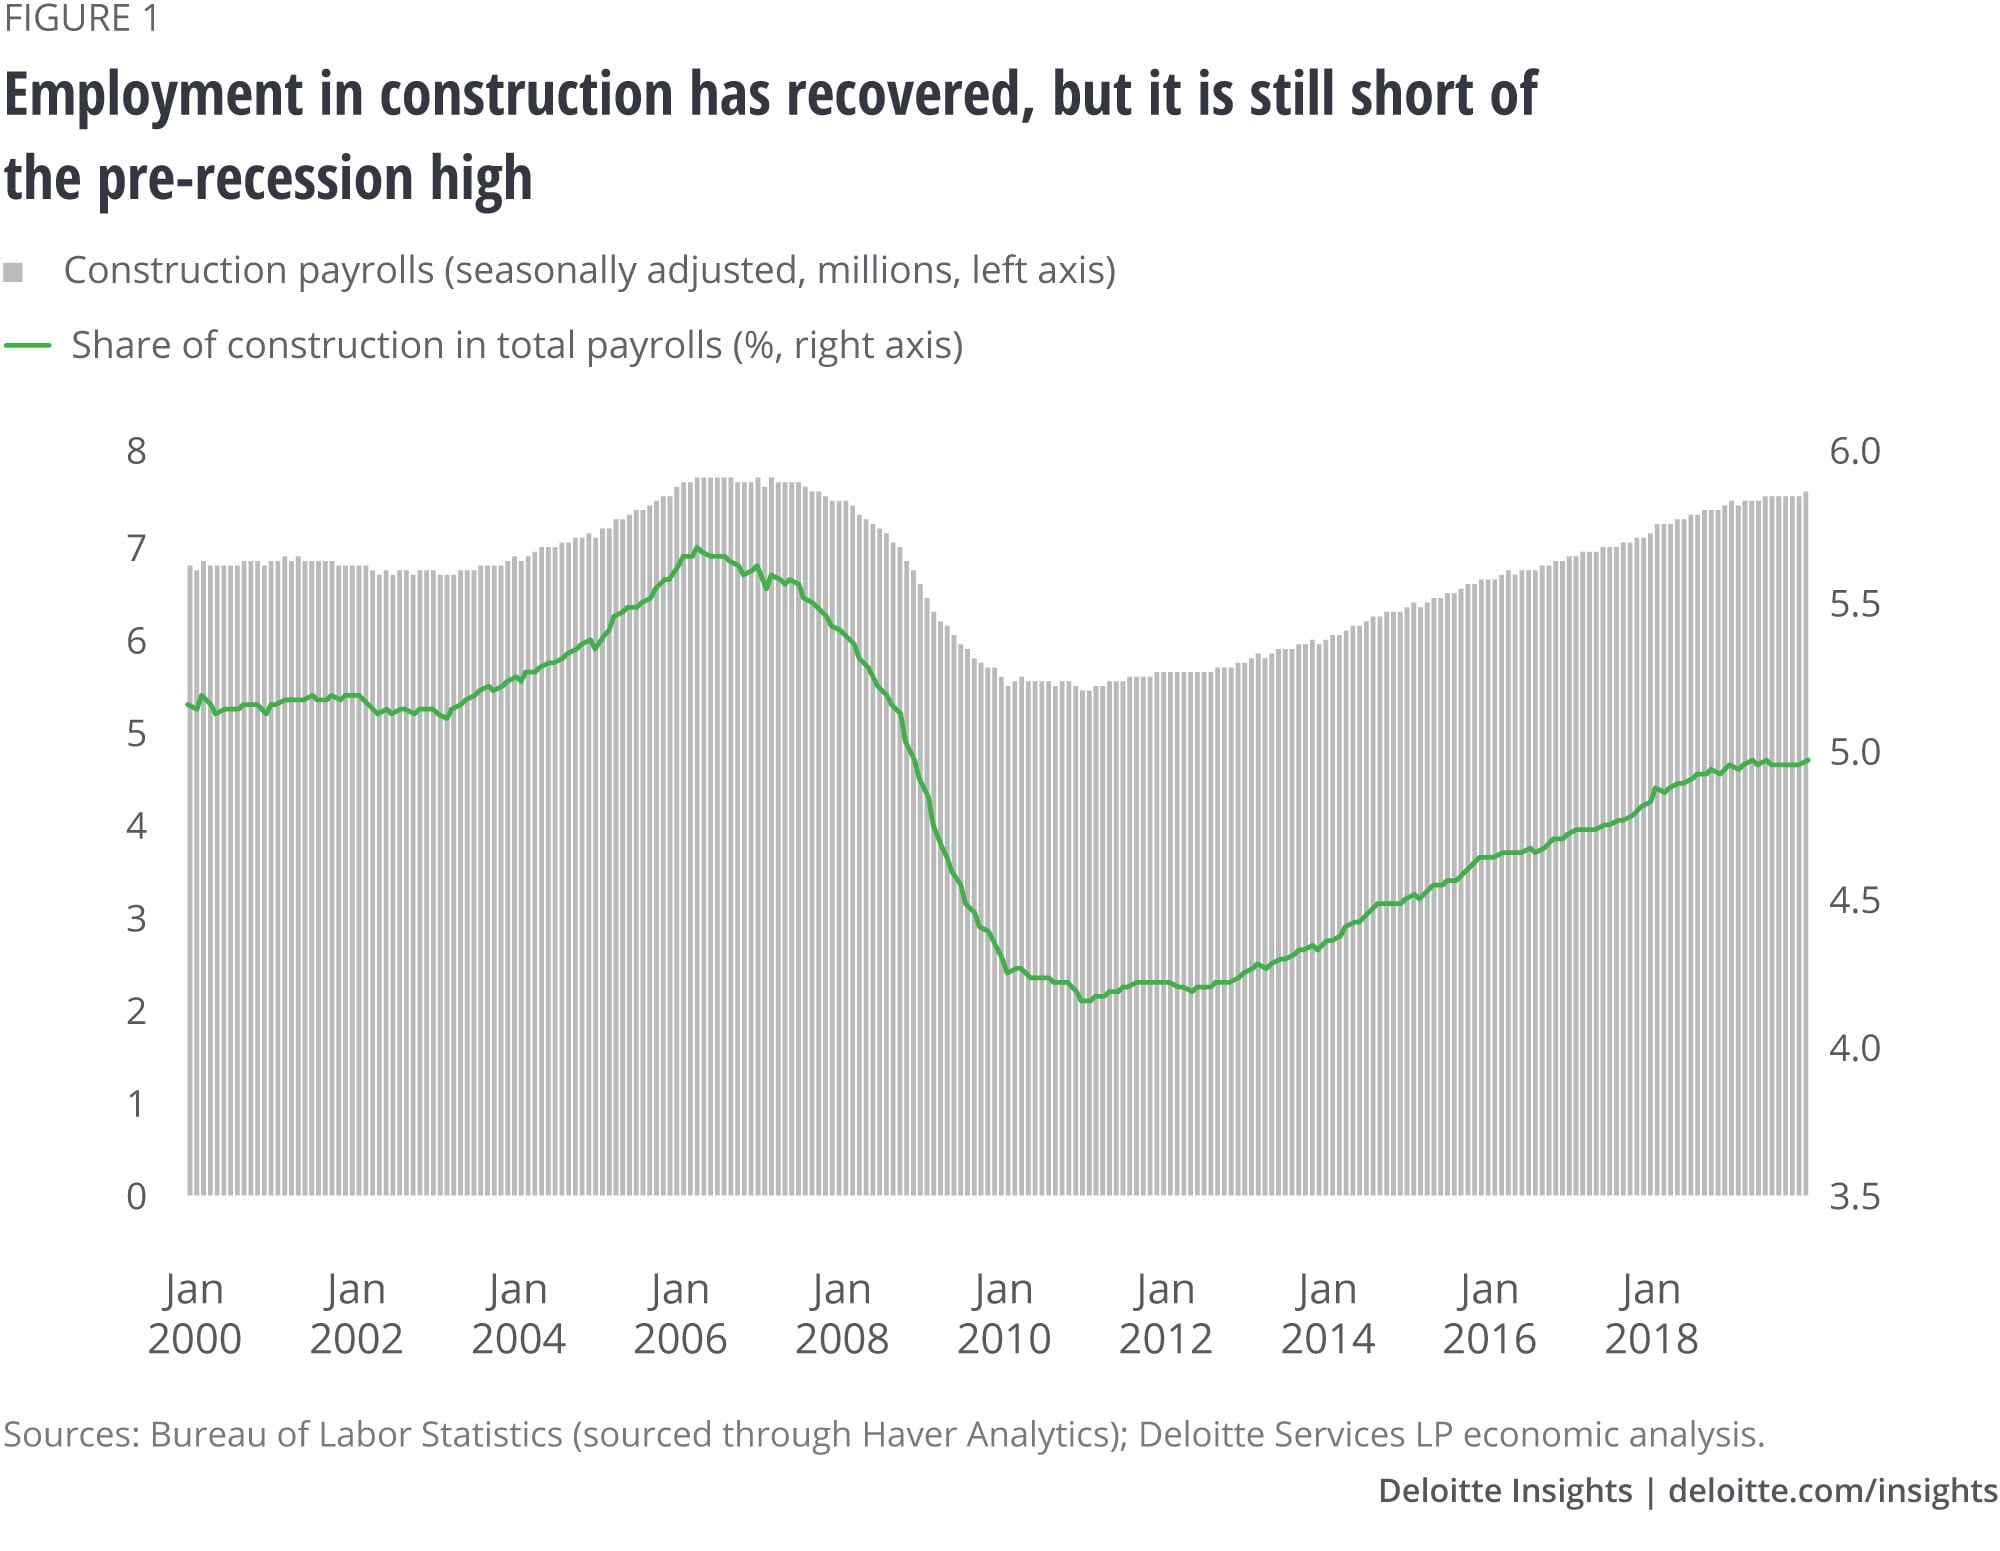 Employment in construction has recovered, but it is still short of the pre-recession high